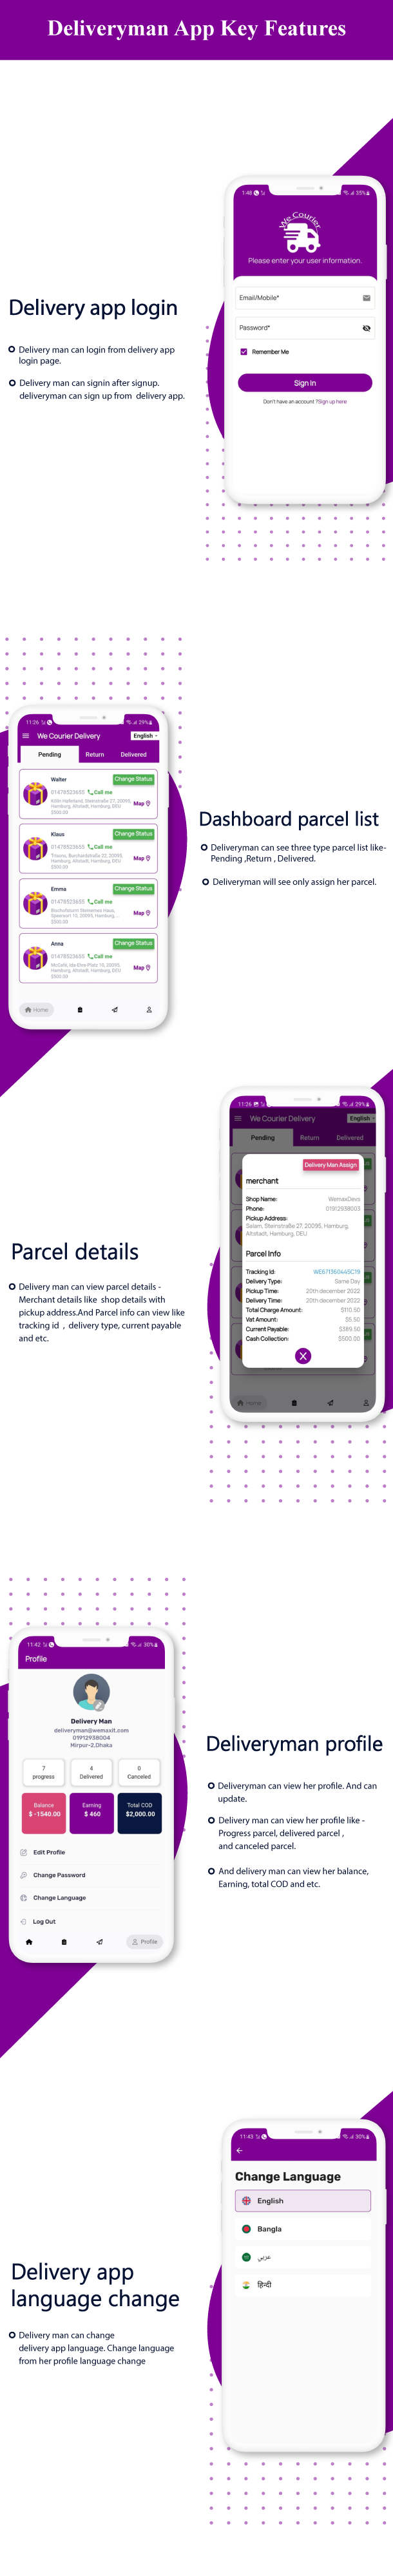 We Courier - Courier and logistics management CMS with Merchant,Delivery app - 18